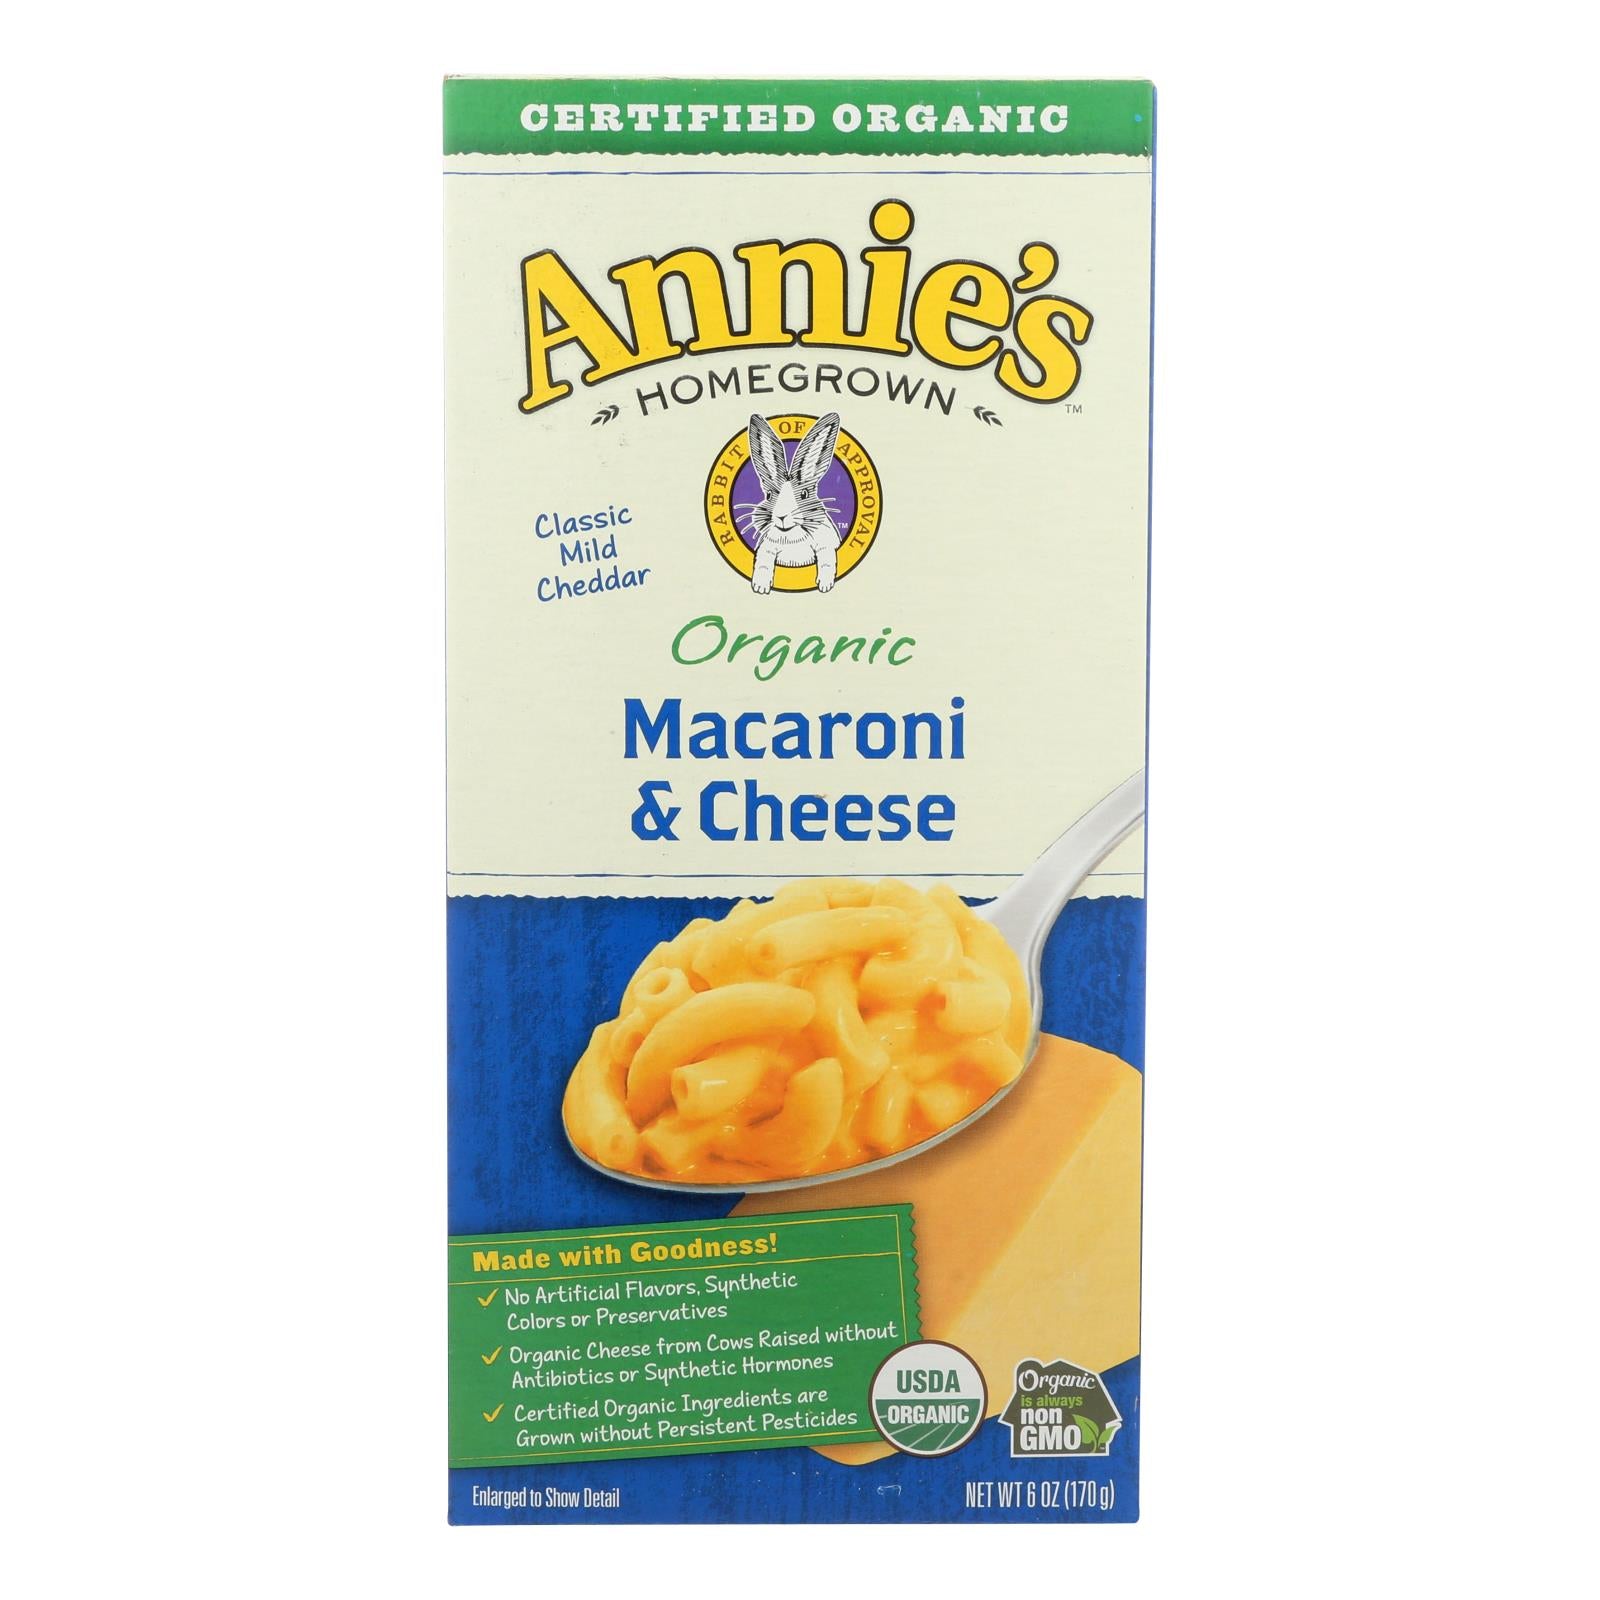 Annie'S Homegrown, Annies Homegrown Macaroni and Cheese - Organic - Classic - 6 oz - case of 12 (Pack of 12)